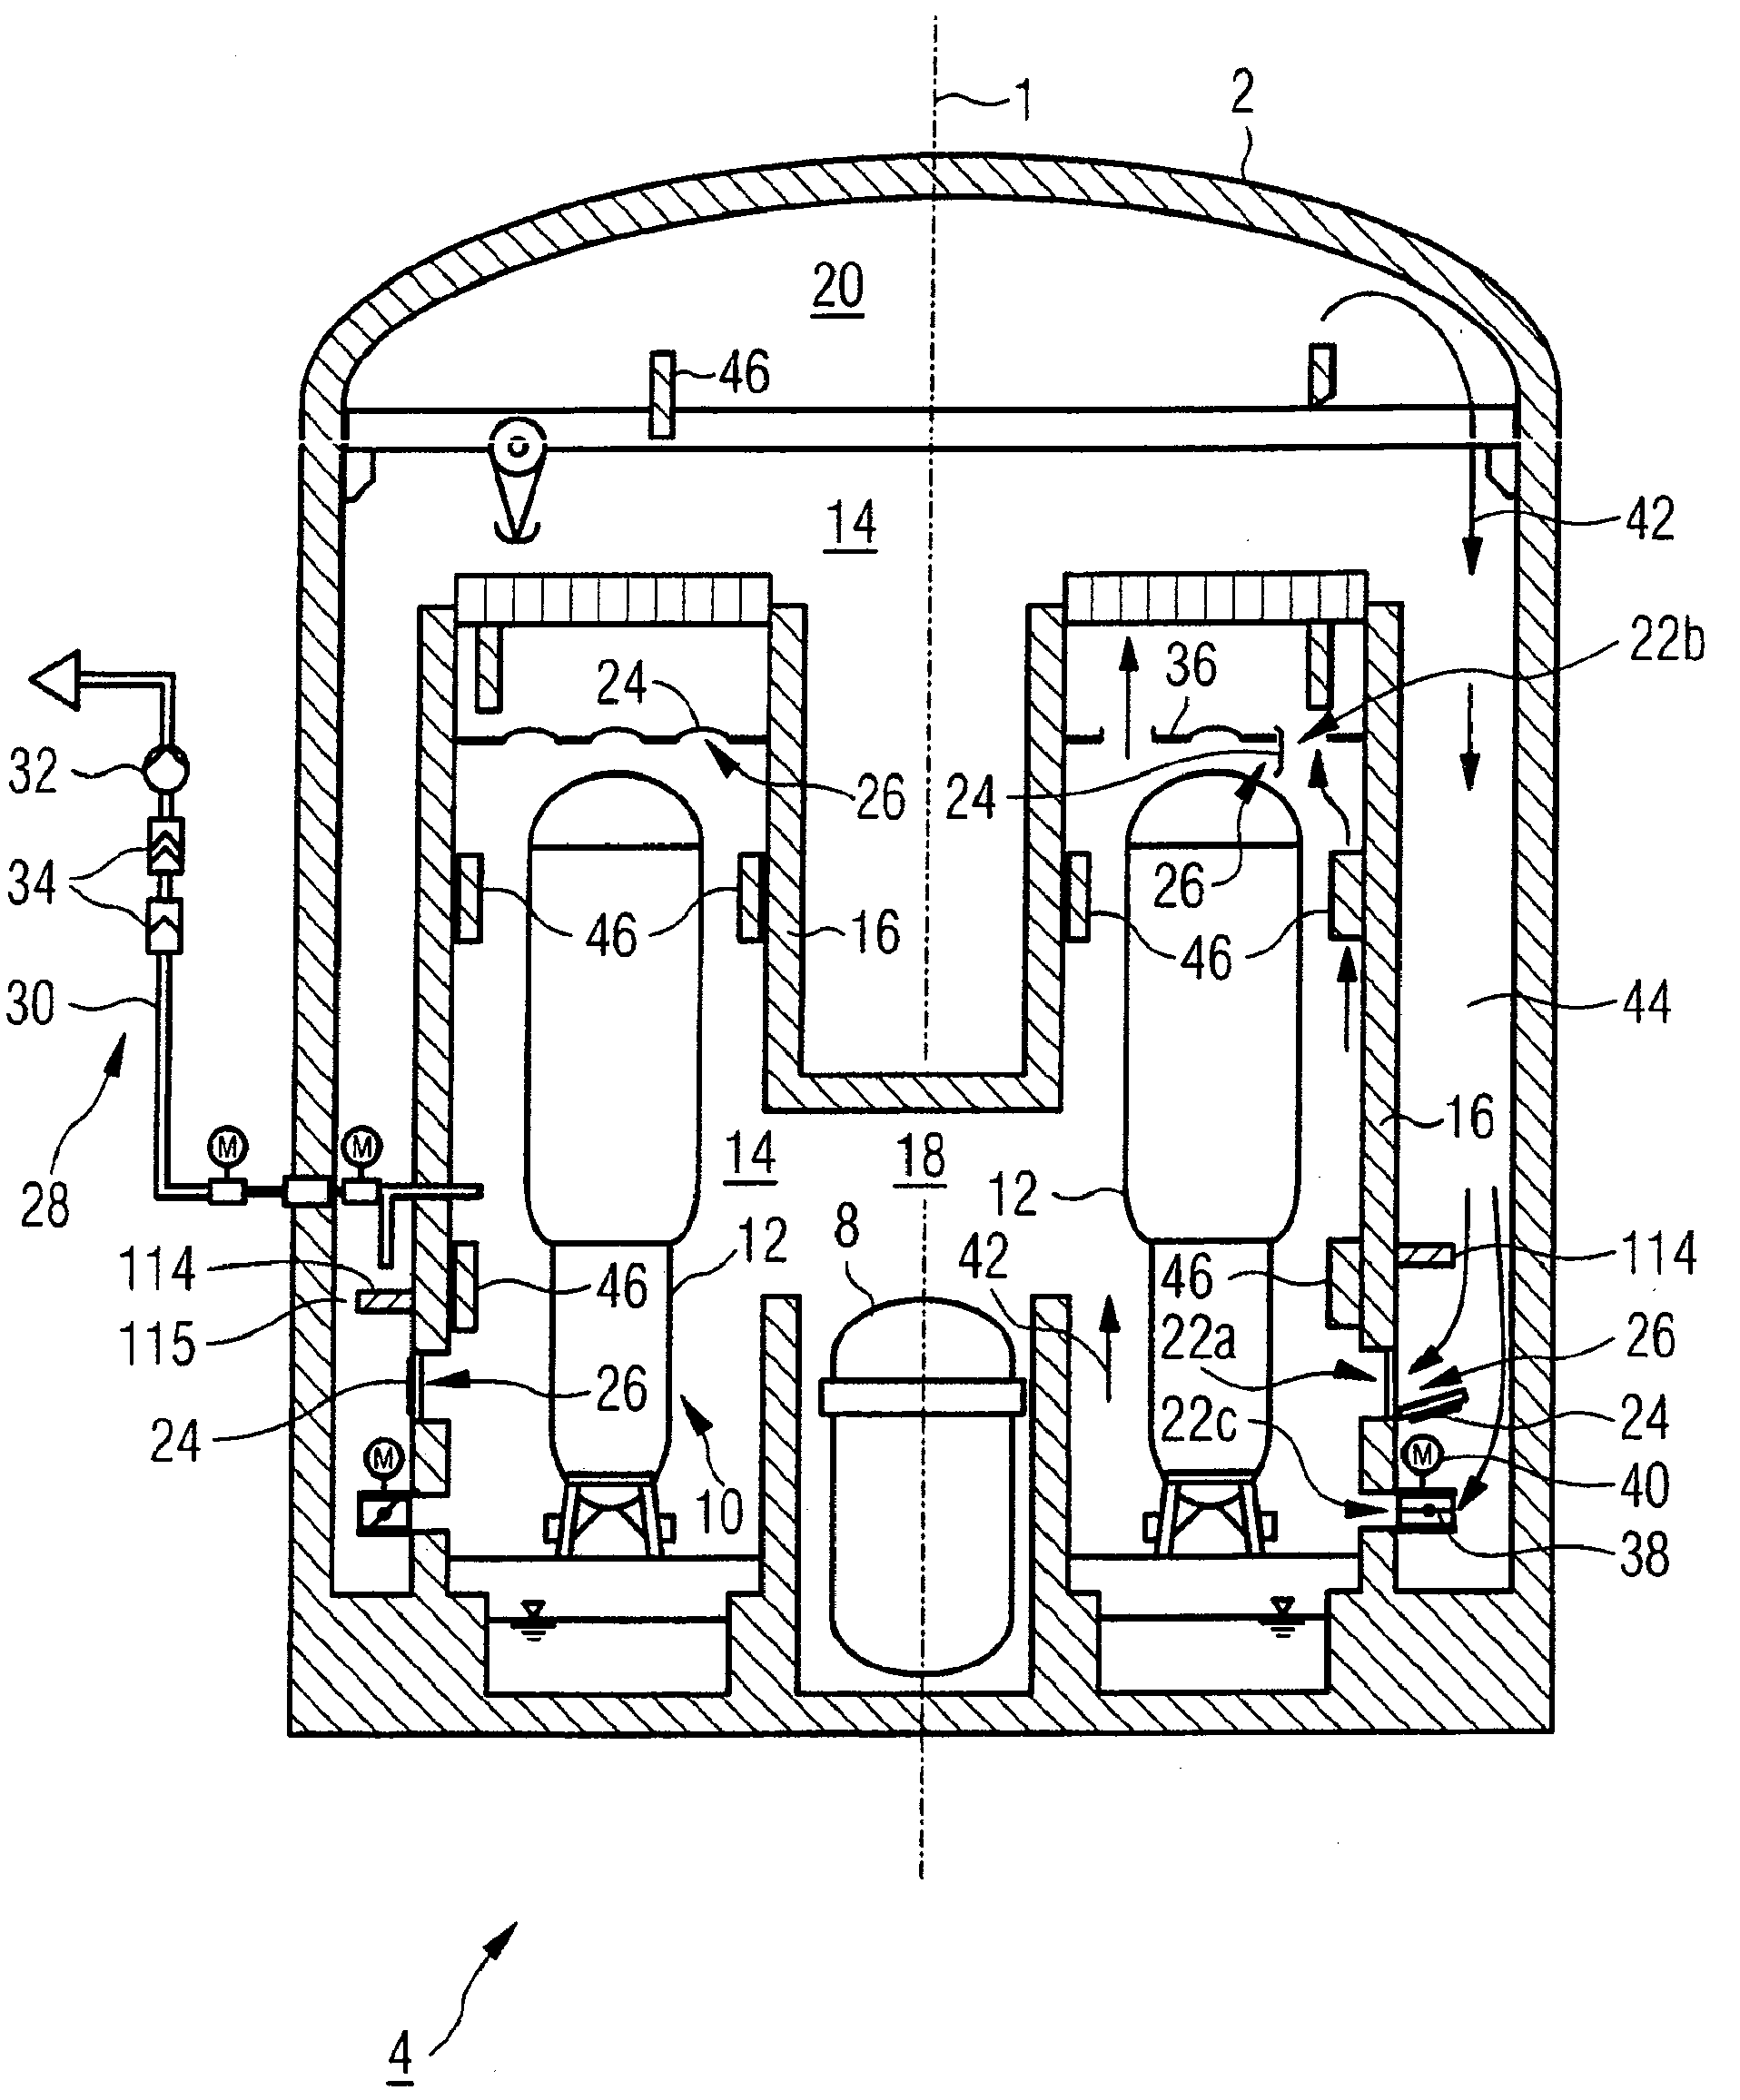 Nuclear engineering plant and closure apparatus for its containment